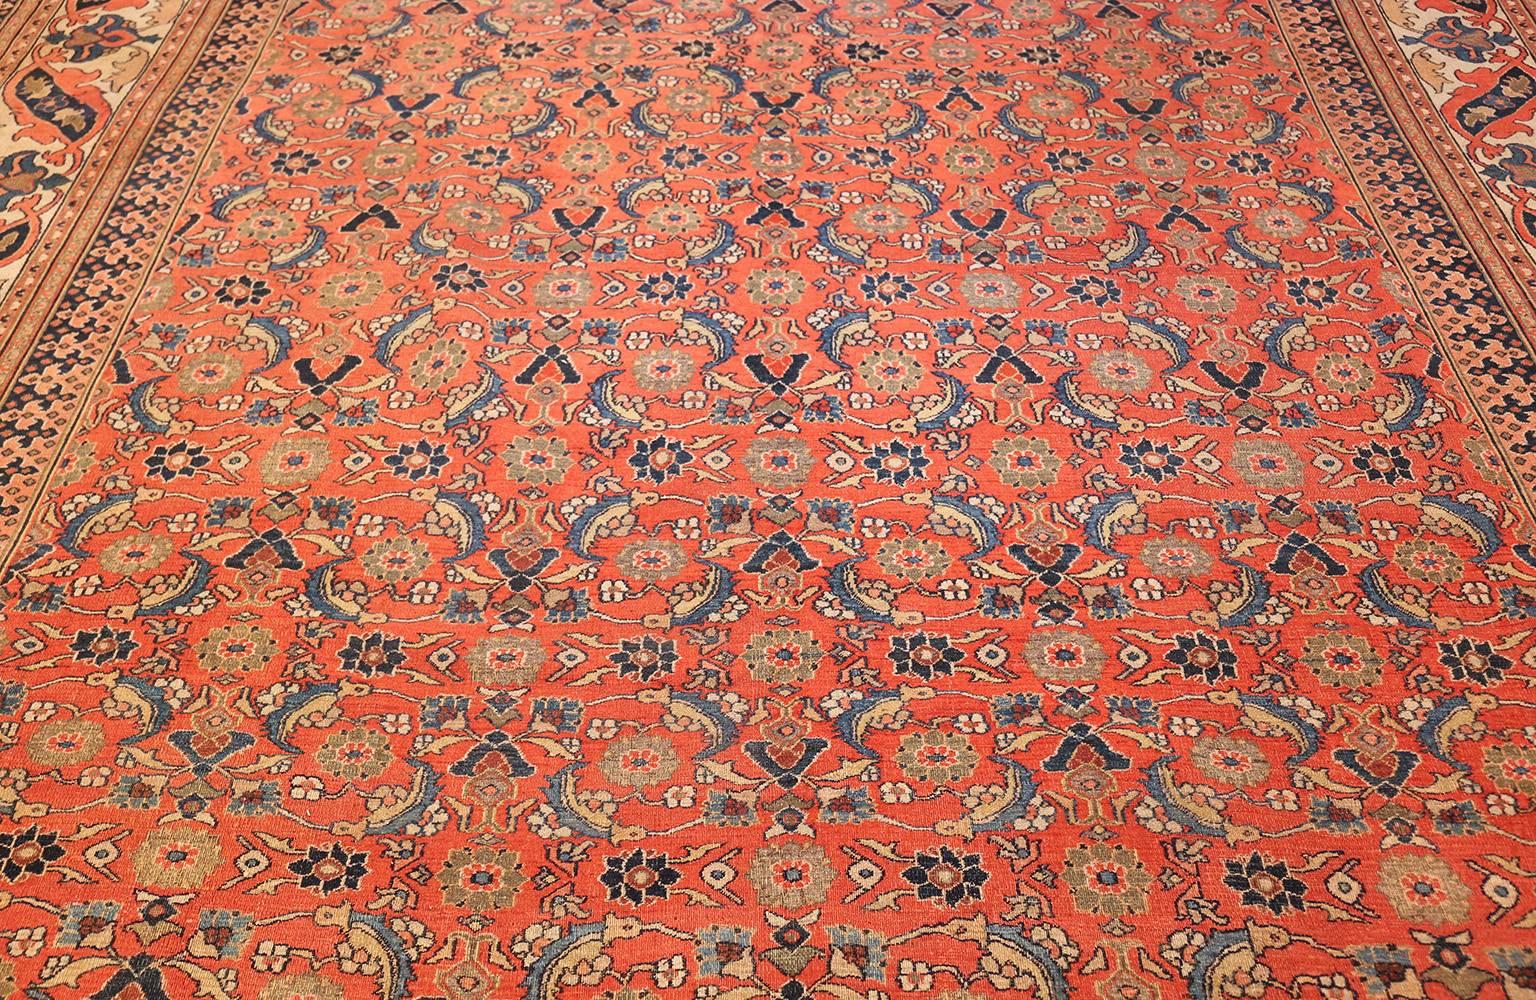 Hand-Knotted Antique Persian Khorassan Carpet. Size: 9 ft 10 in x 13 ft 9 in (3 m x 4.19 m)